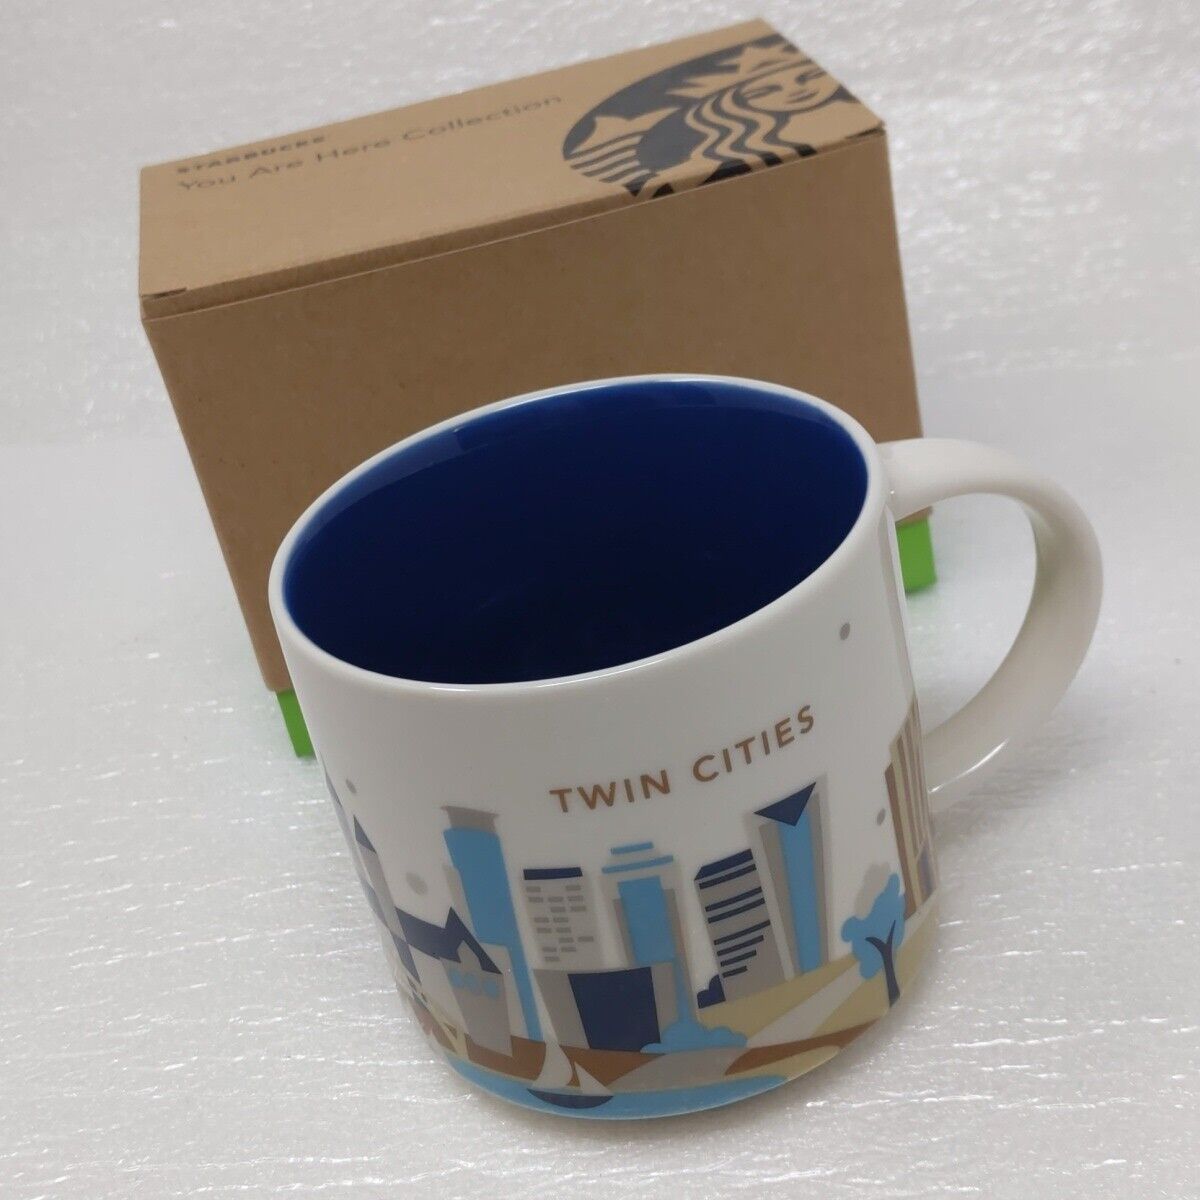 NEW Starbucks Twin Cities You Are Here Mug - COFFEE CUP IN BOX